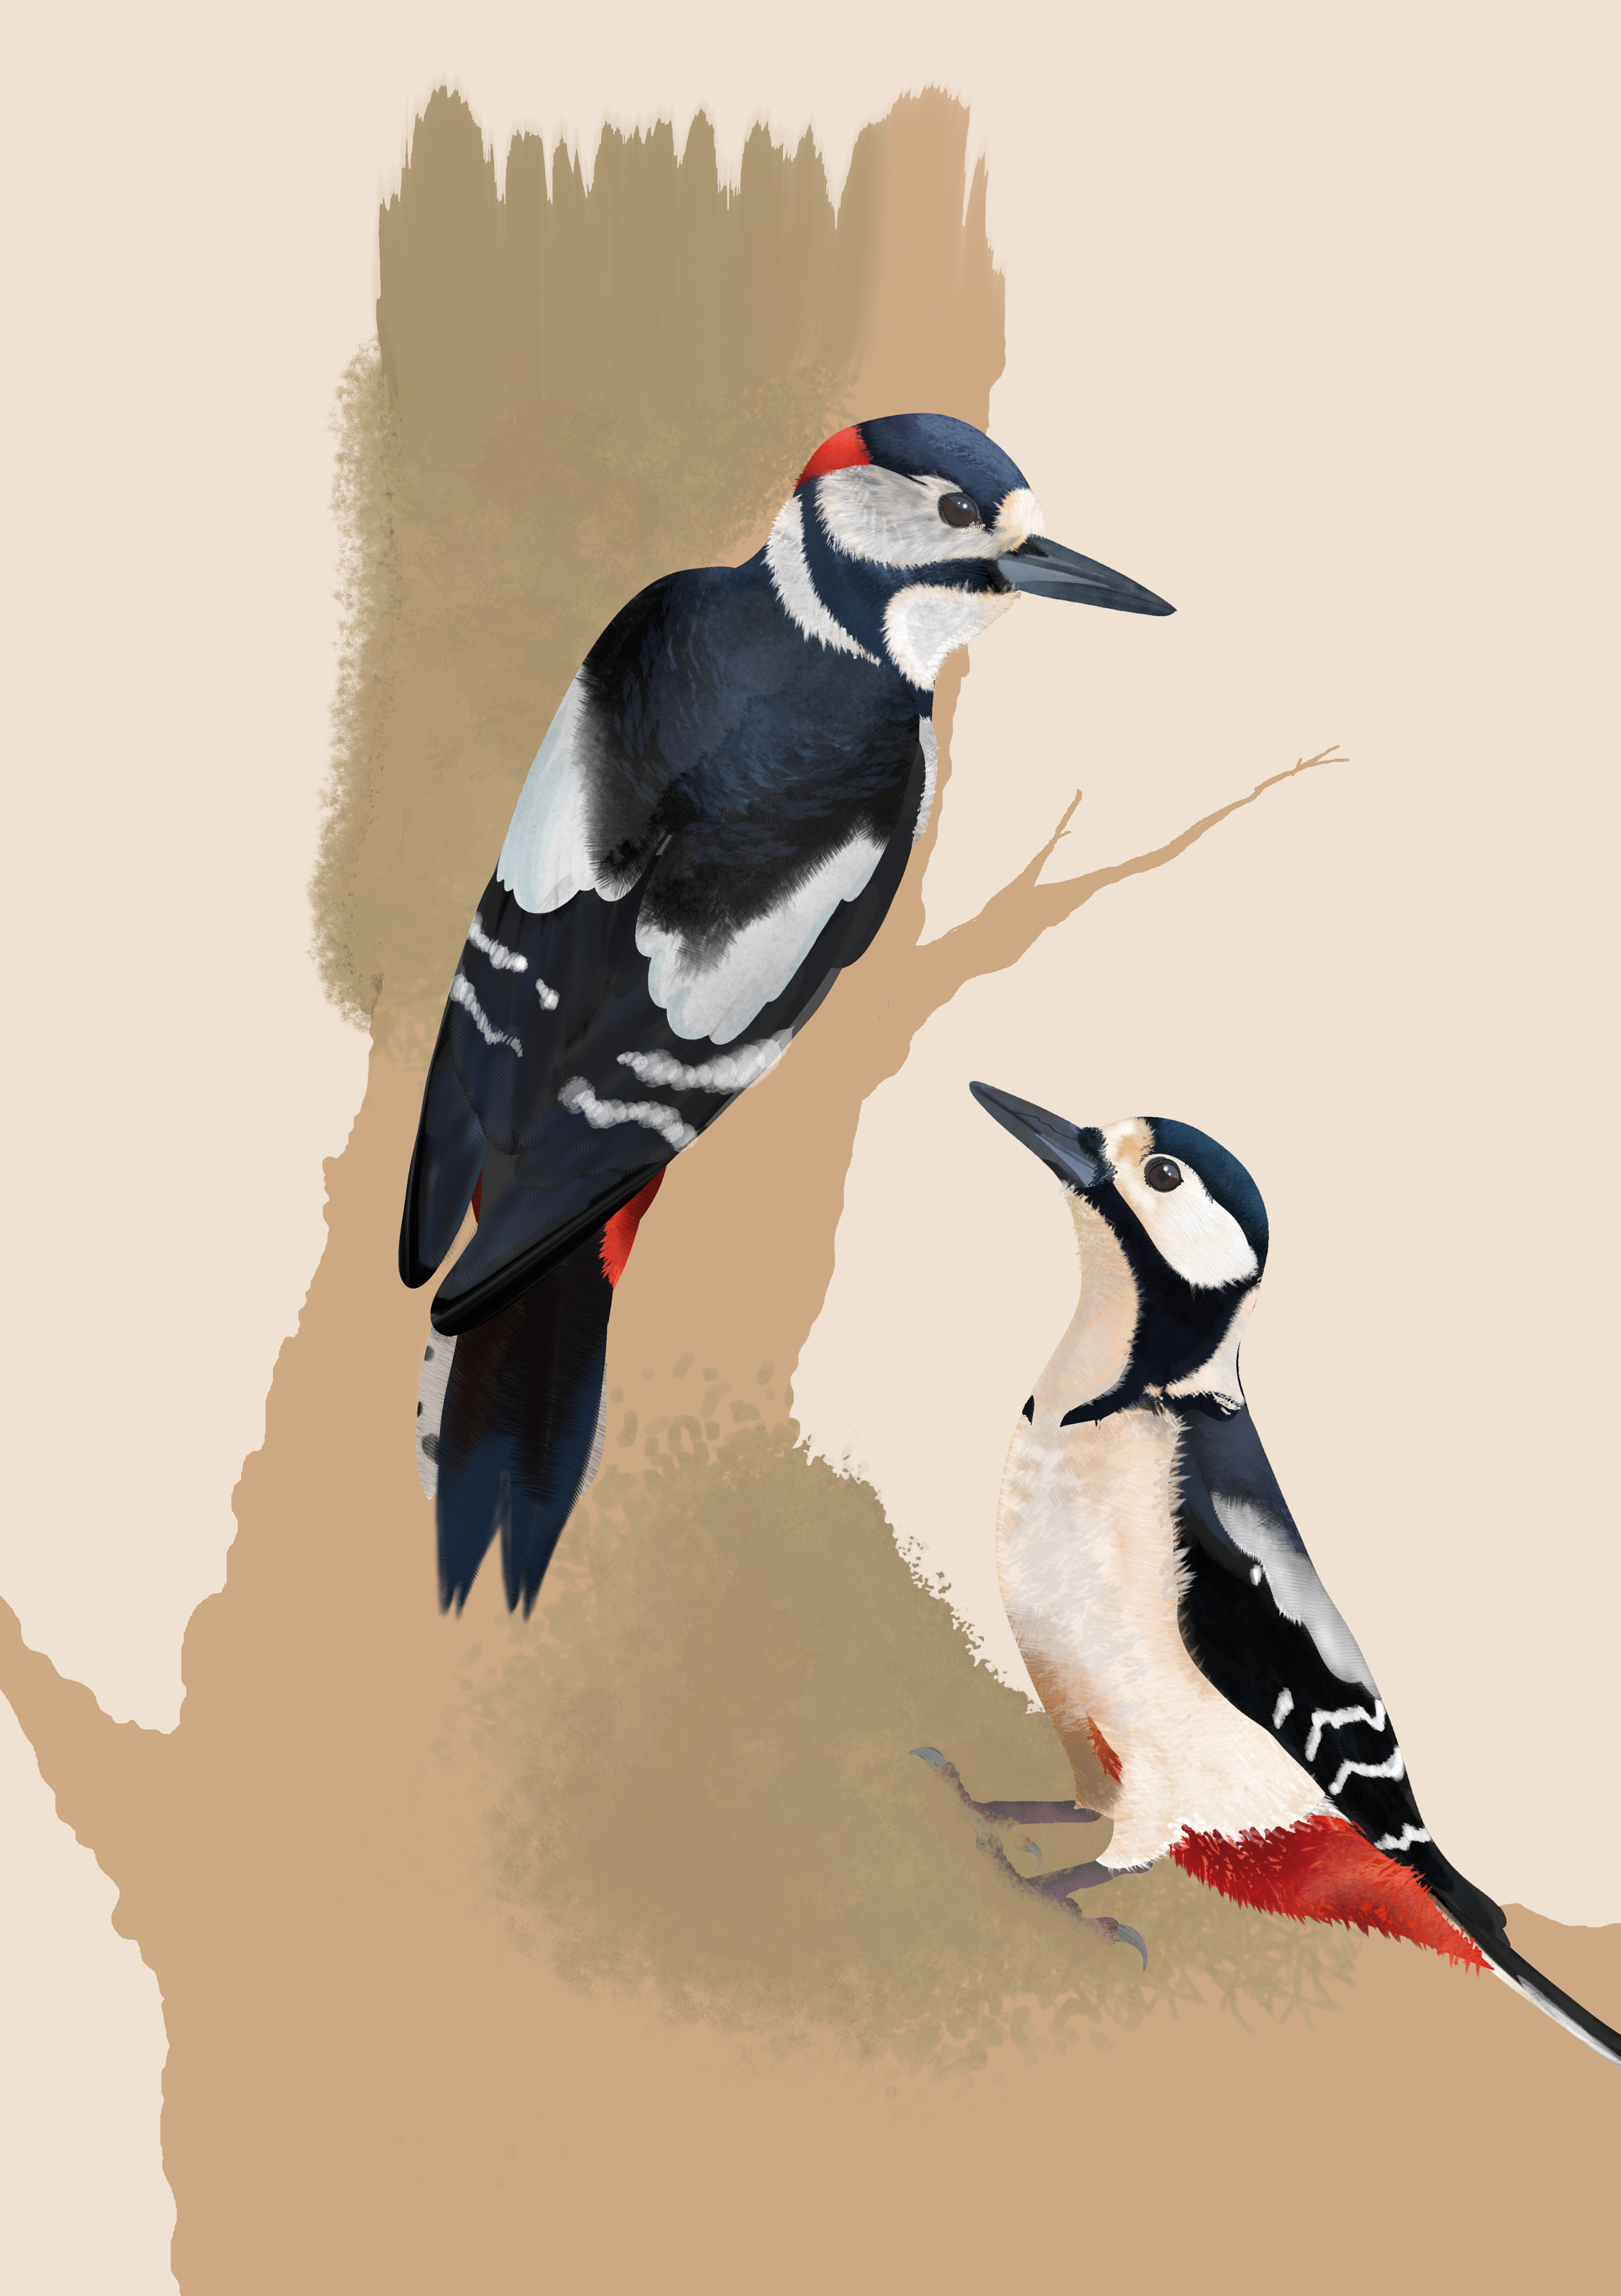 BA Illustration work by Alistair Simmonds showing an ornithology illustration of two woodpeckers posed on a tree trunk